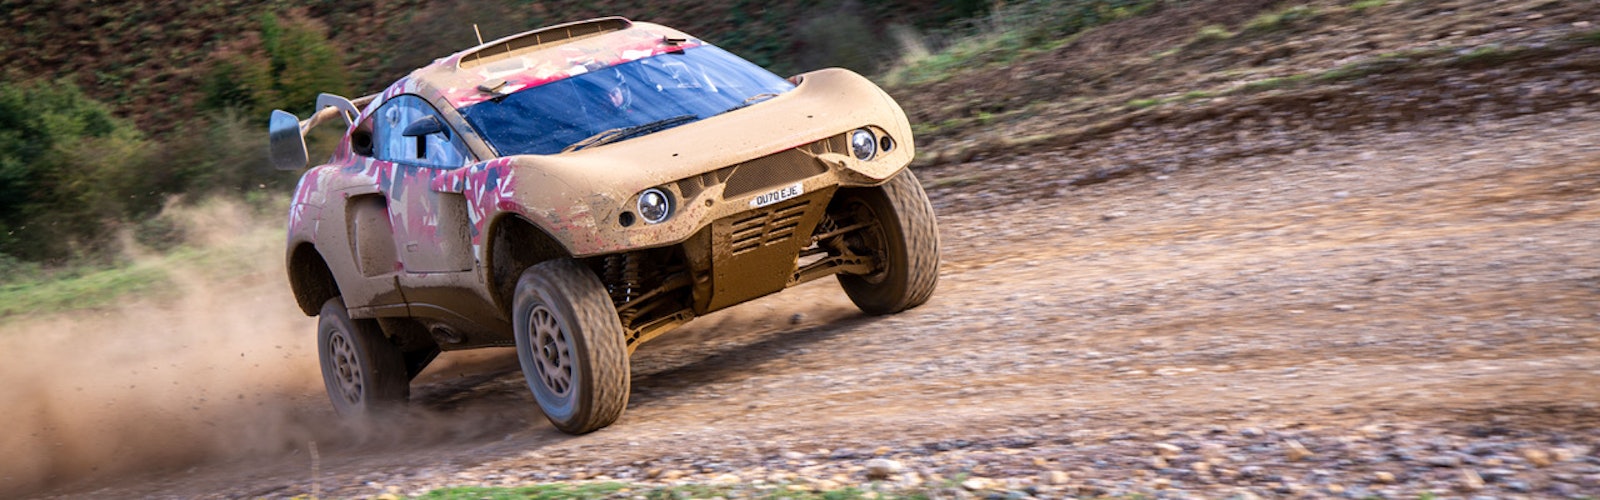 Bahrain Raid Xtreme unleashes T1 vehicle at first test in Millbrook (1)